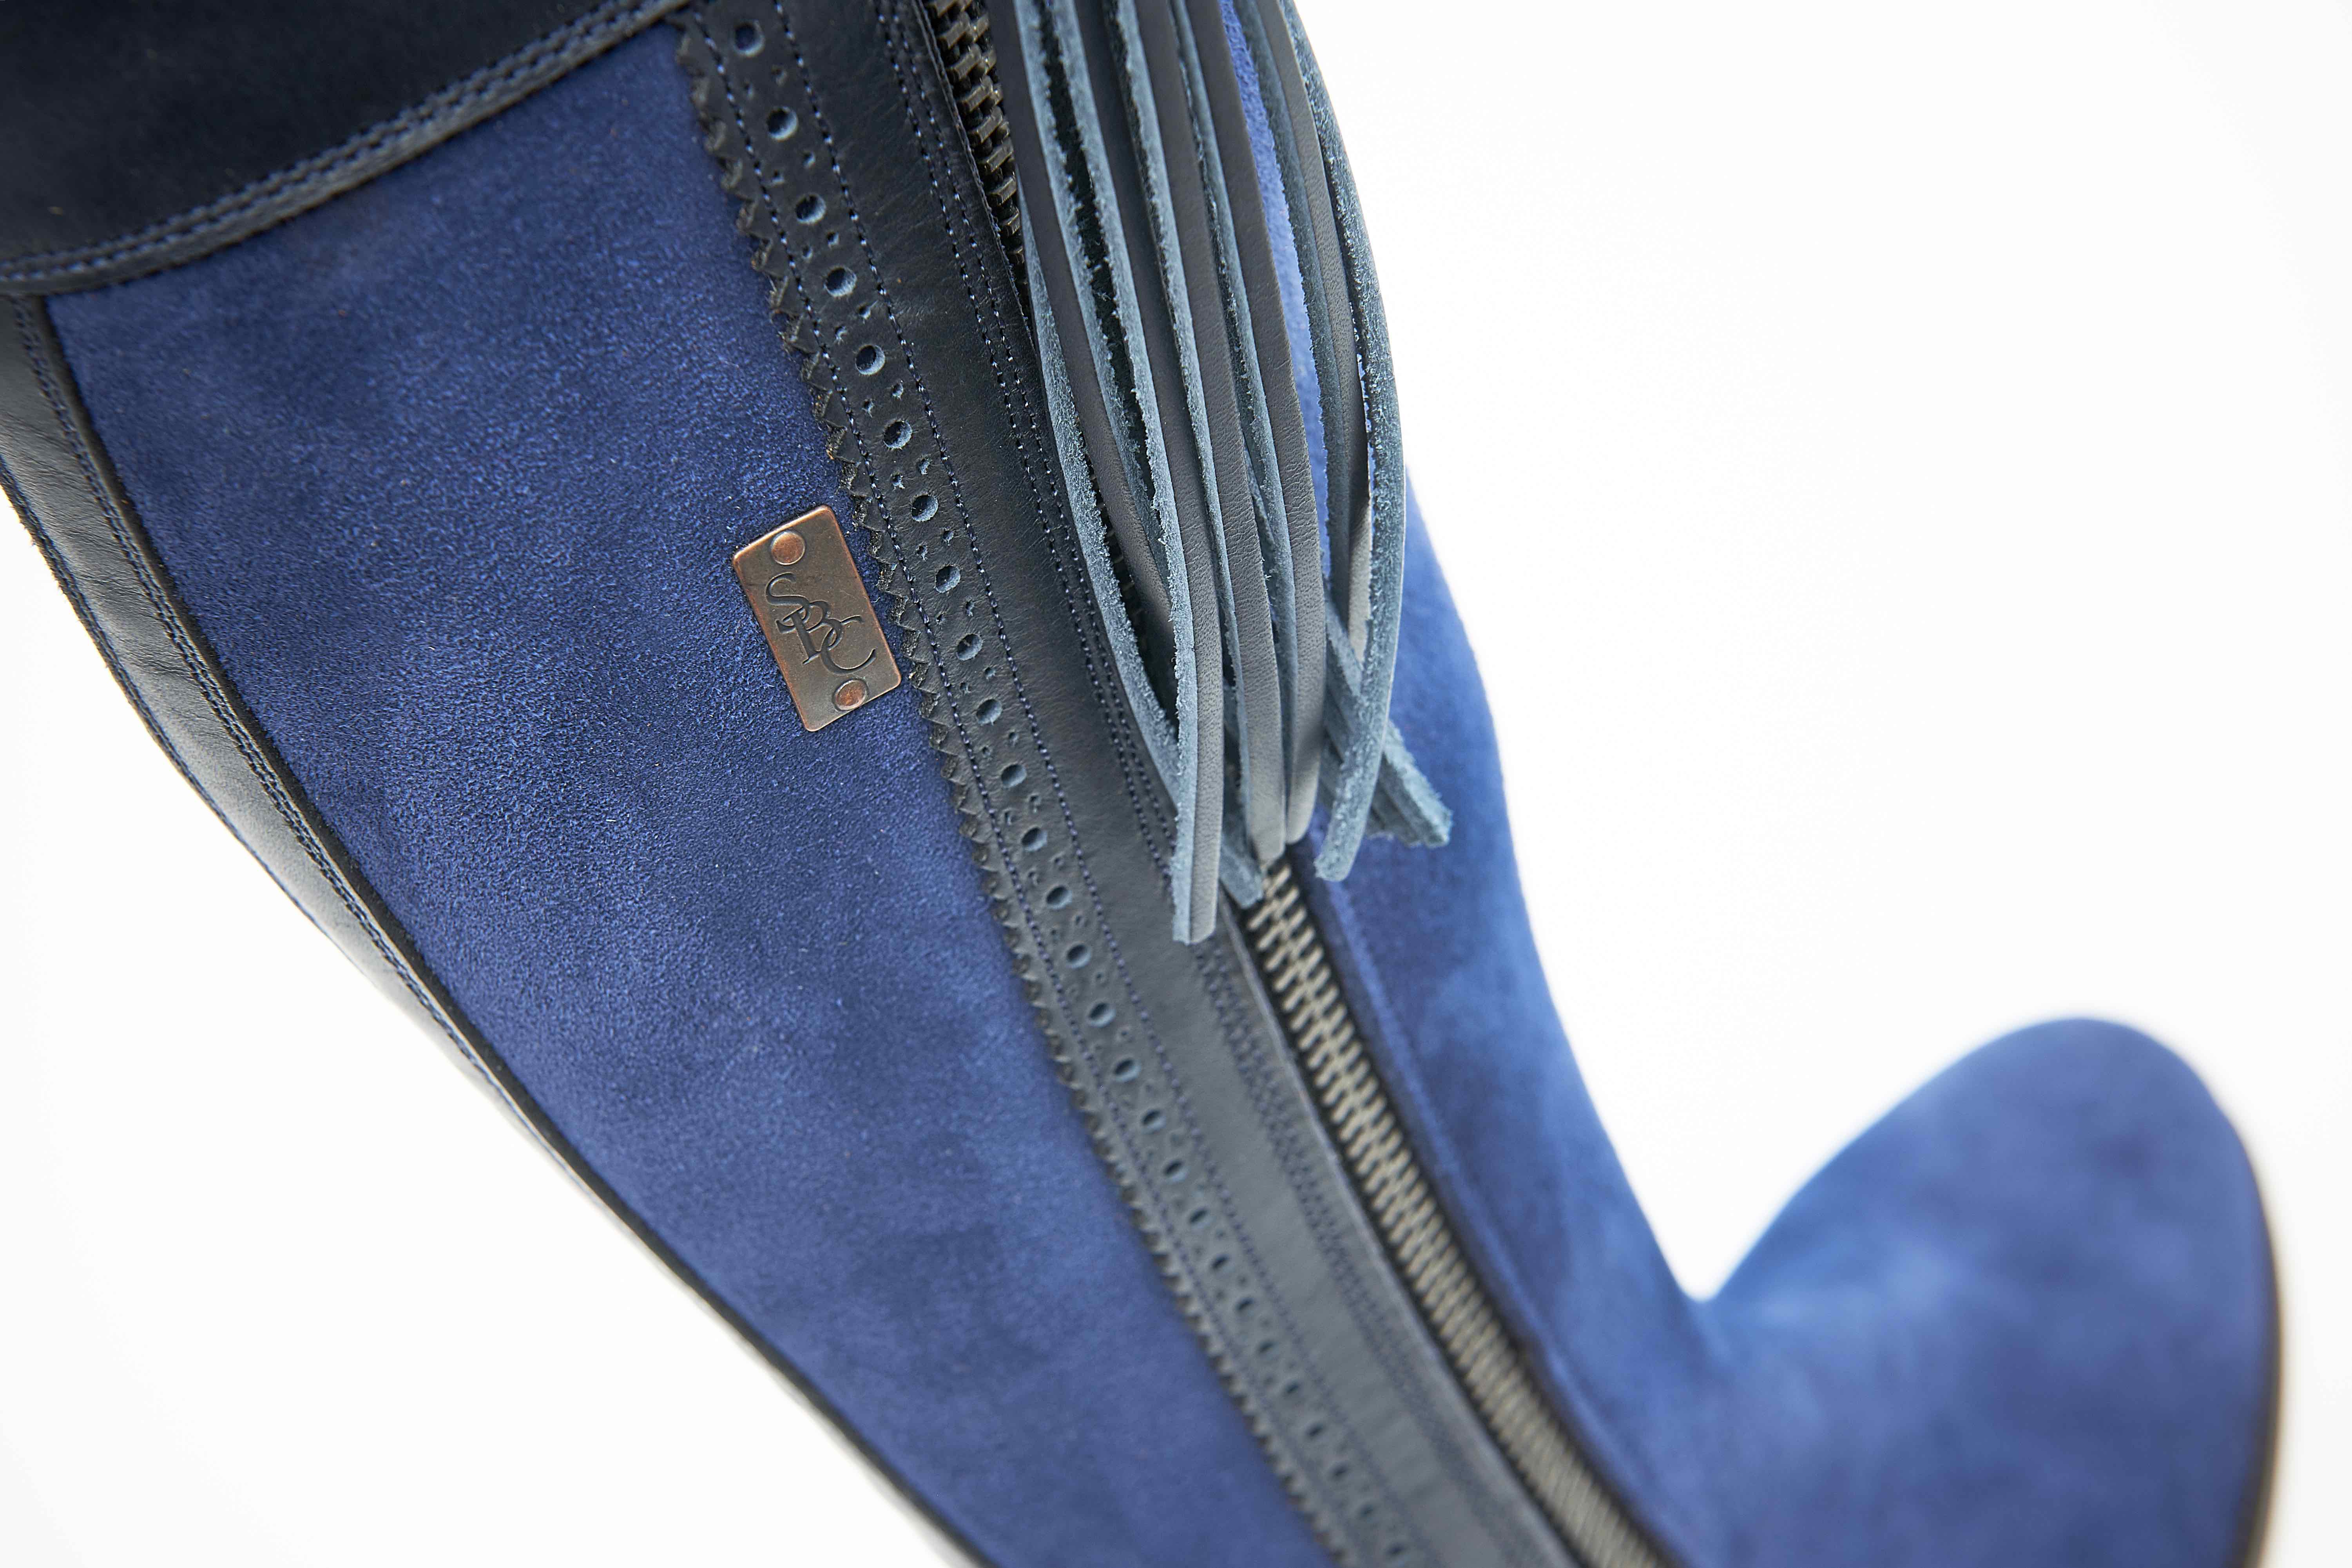 Bespoke Boots from The Spanish Boot Company Blue Suede With leather Detail